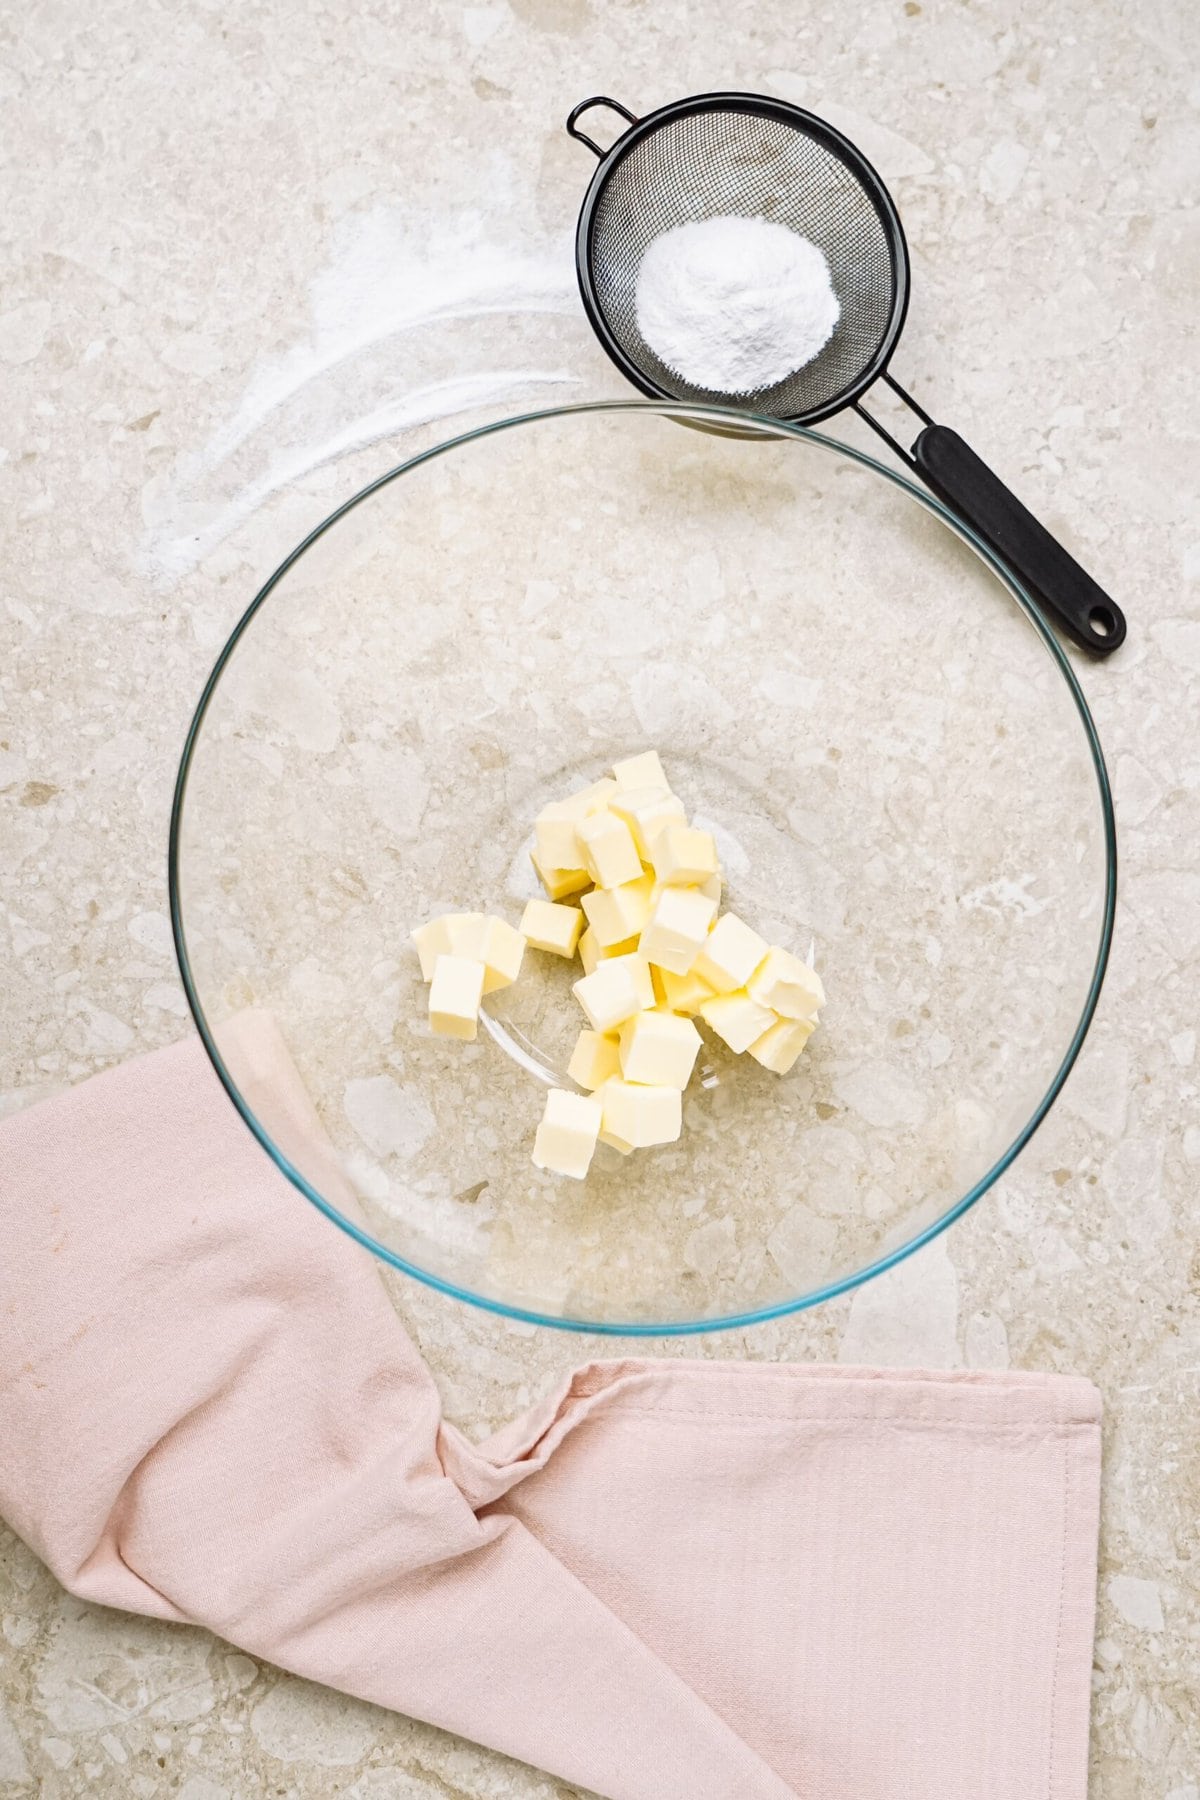 butter cut into squares in a glass bowl